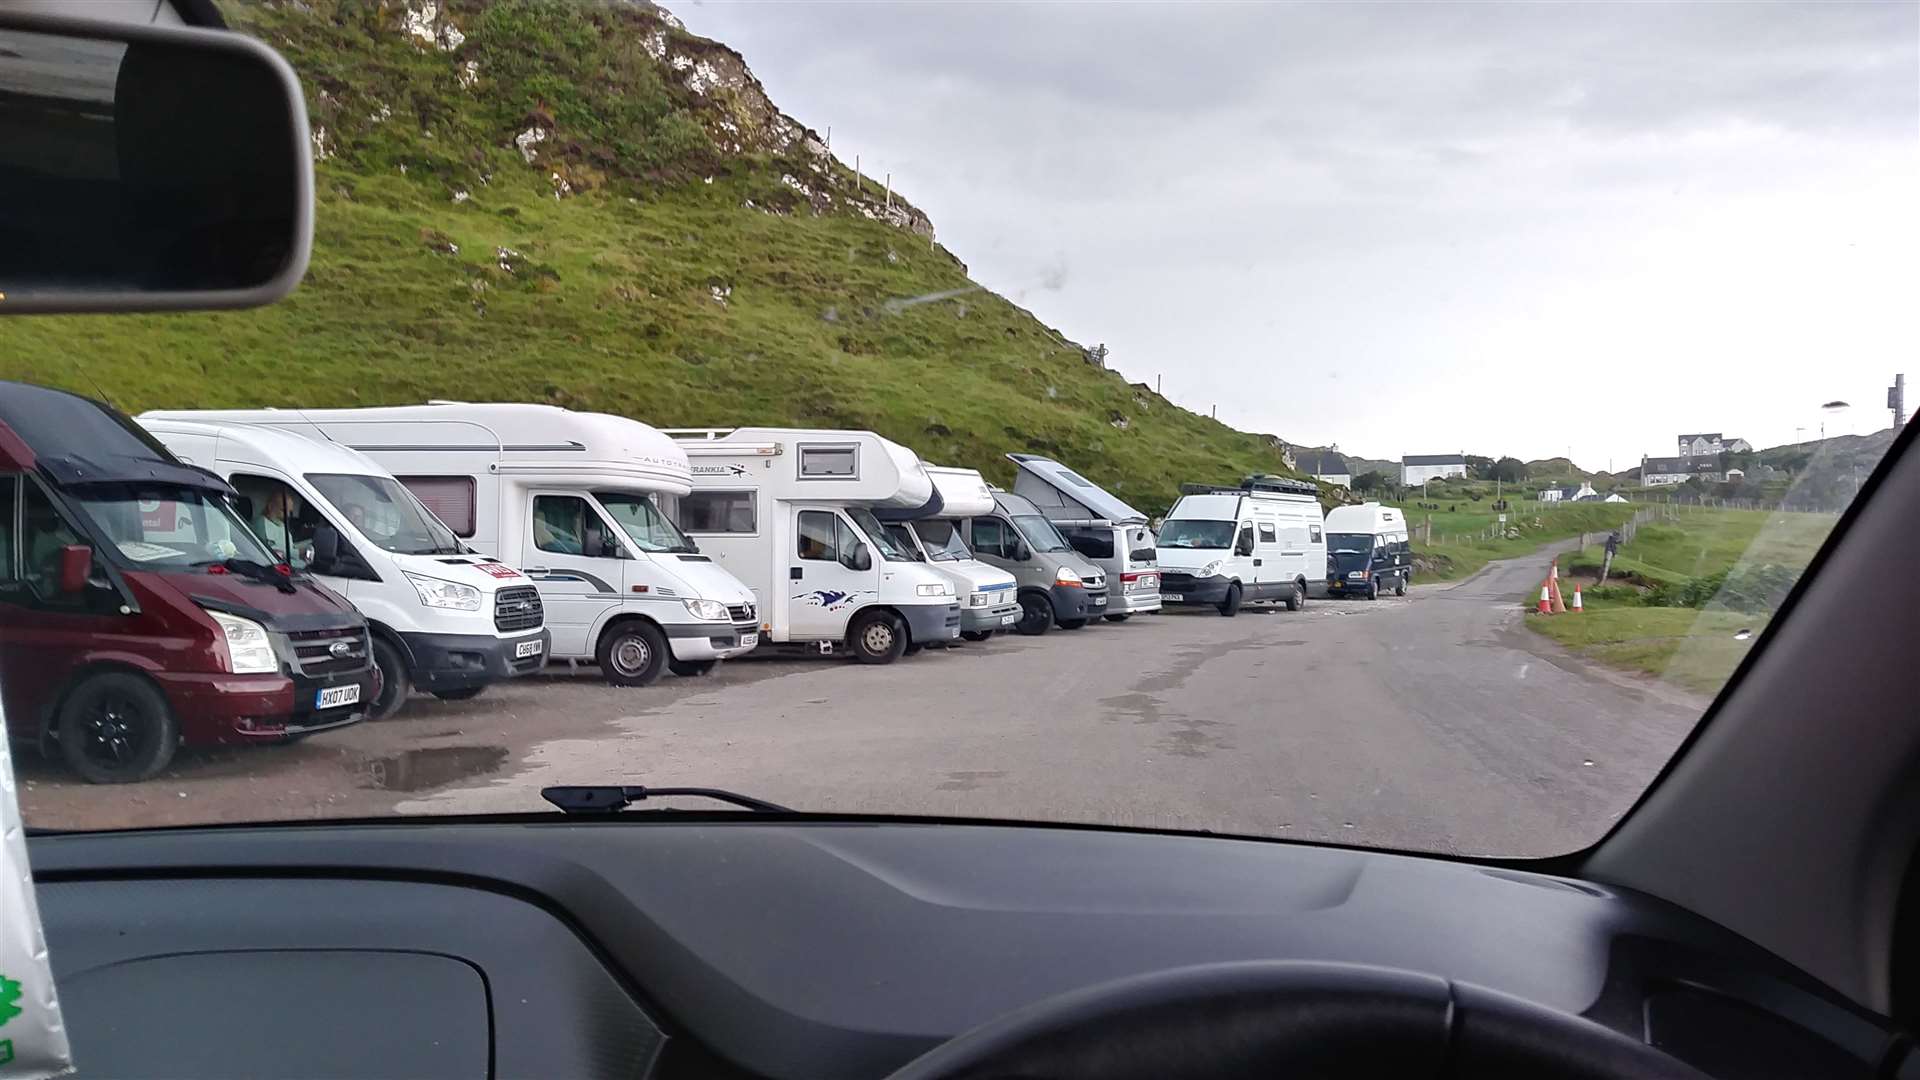 Motorhomes are causing problems in the far north.